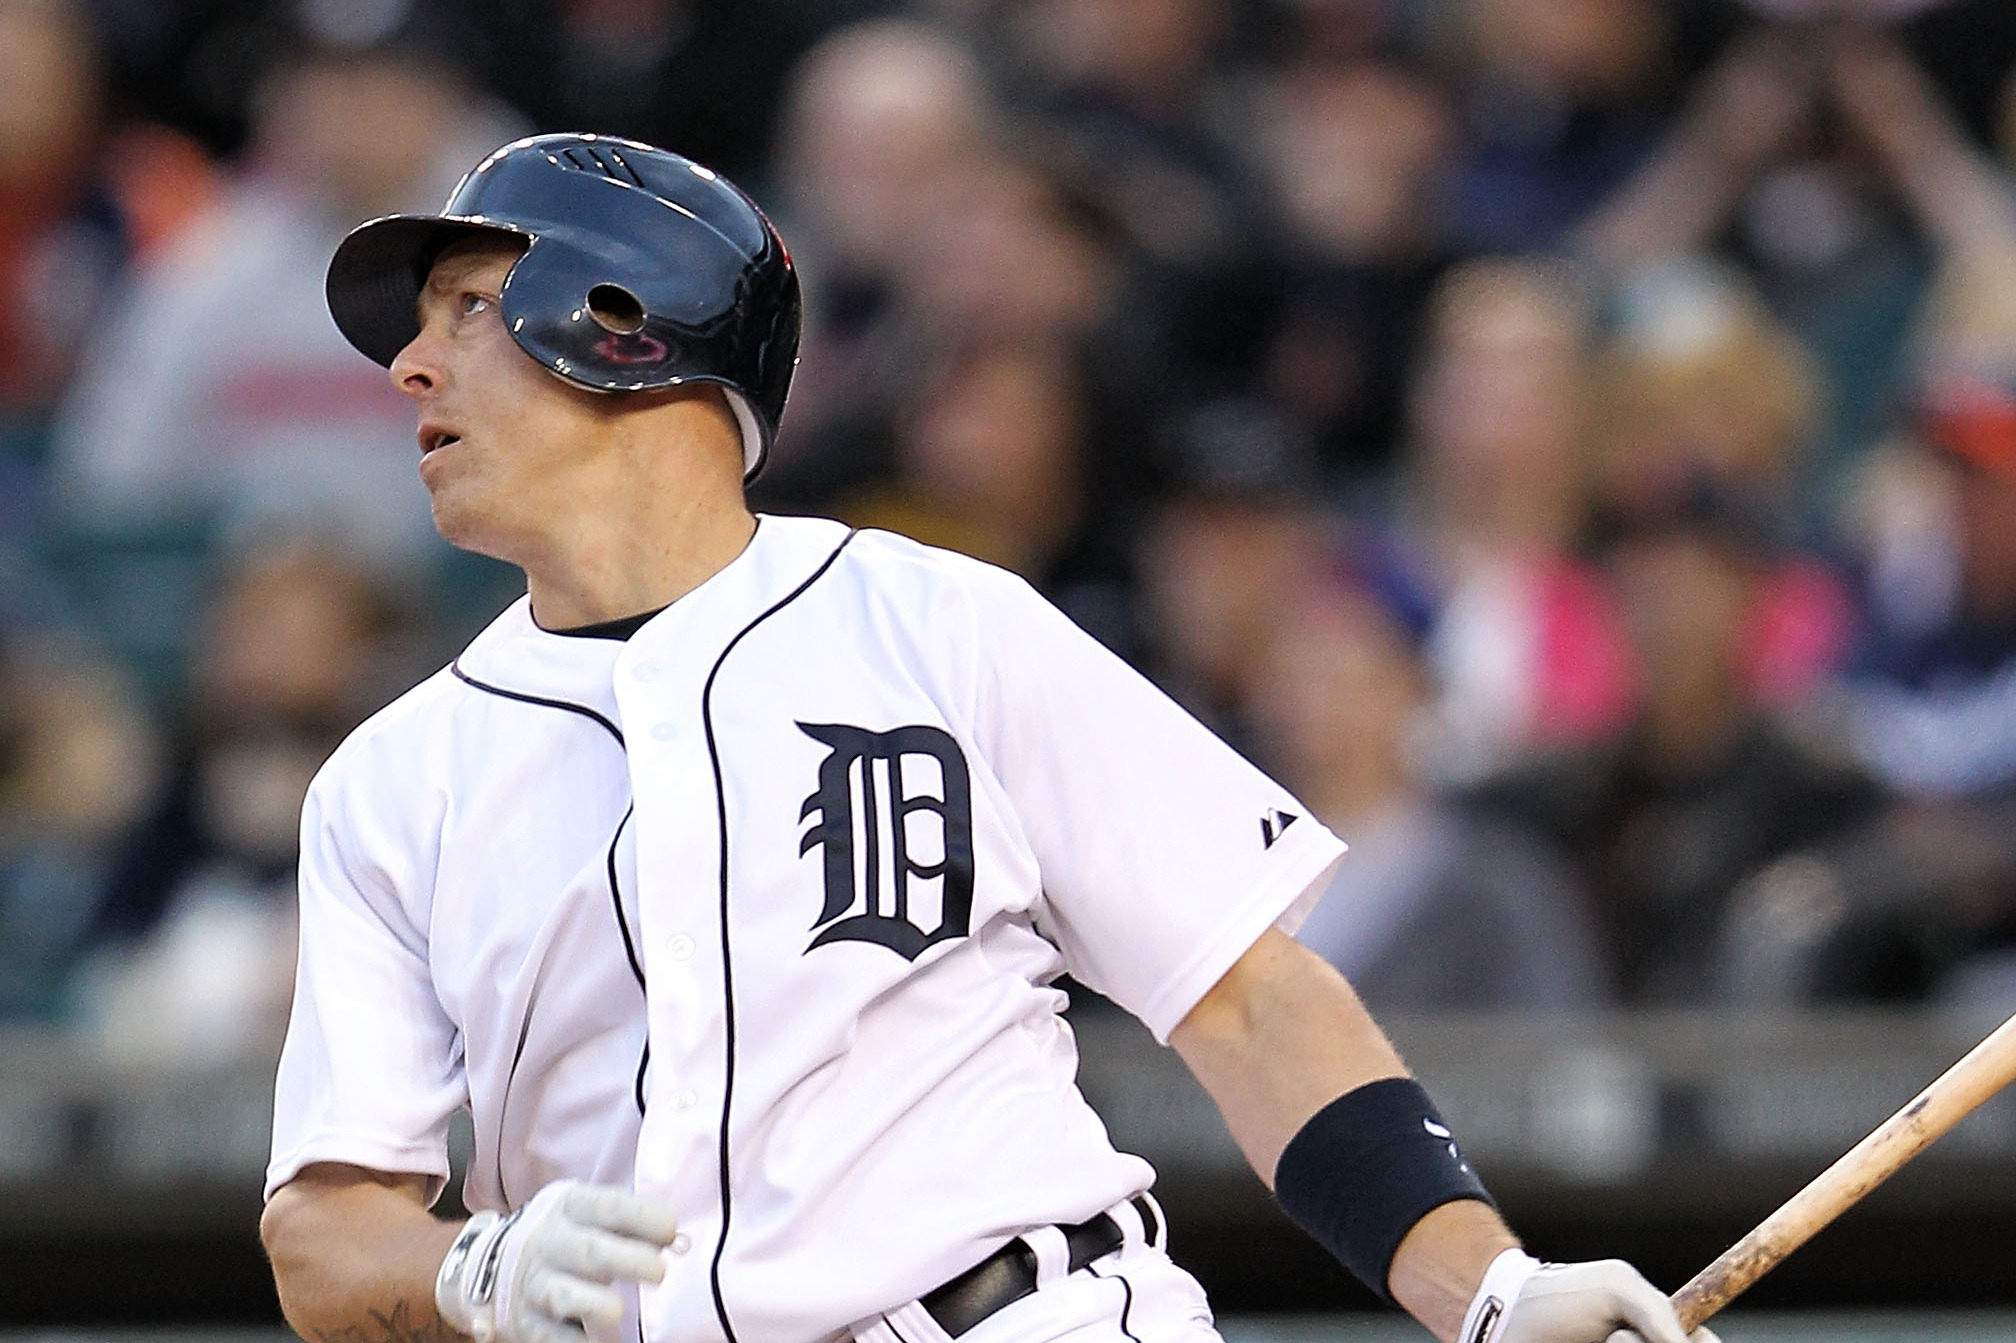 Brandon Inge a believer in Tigers' plans: 'I have faith in it